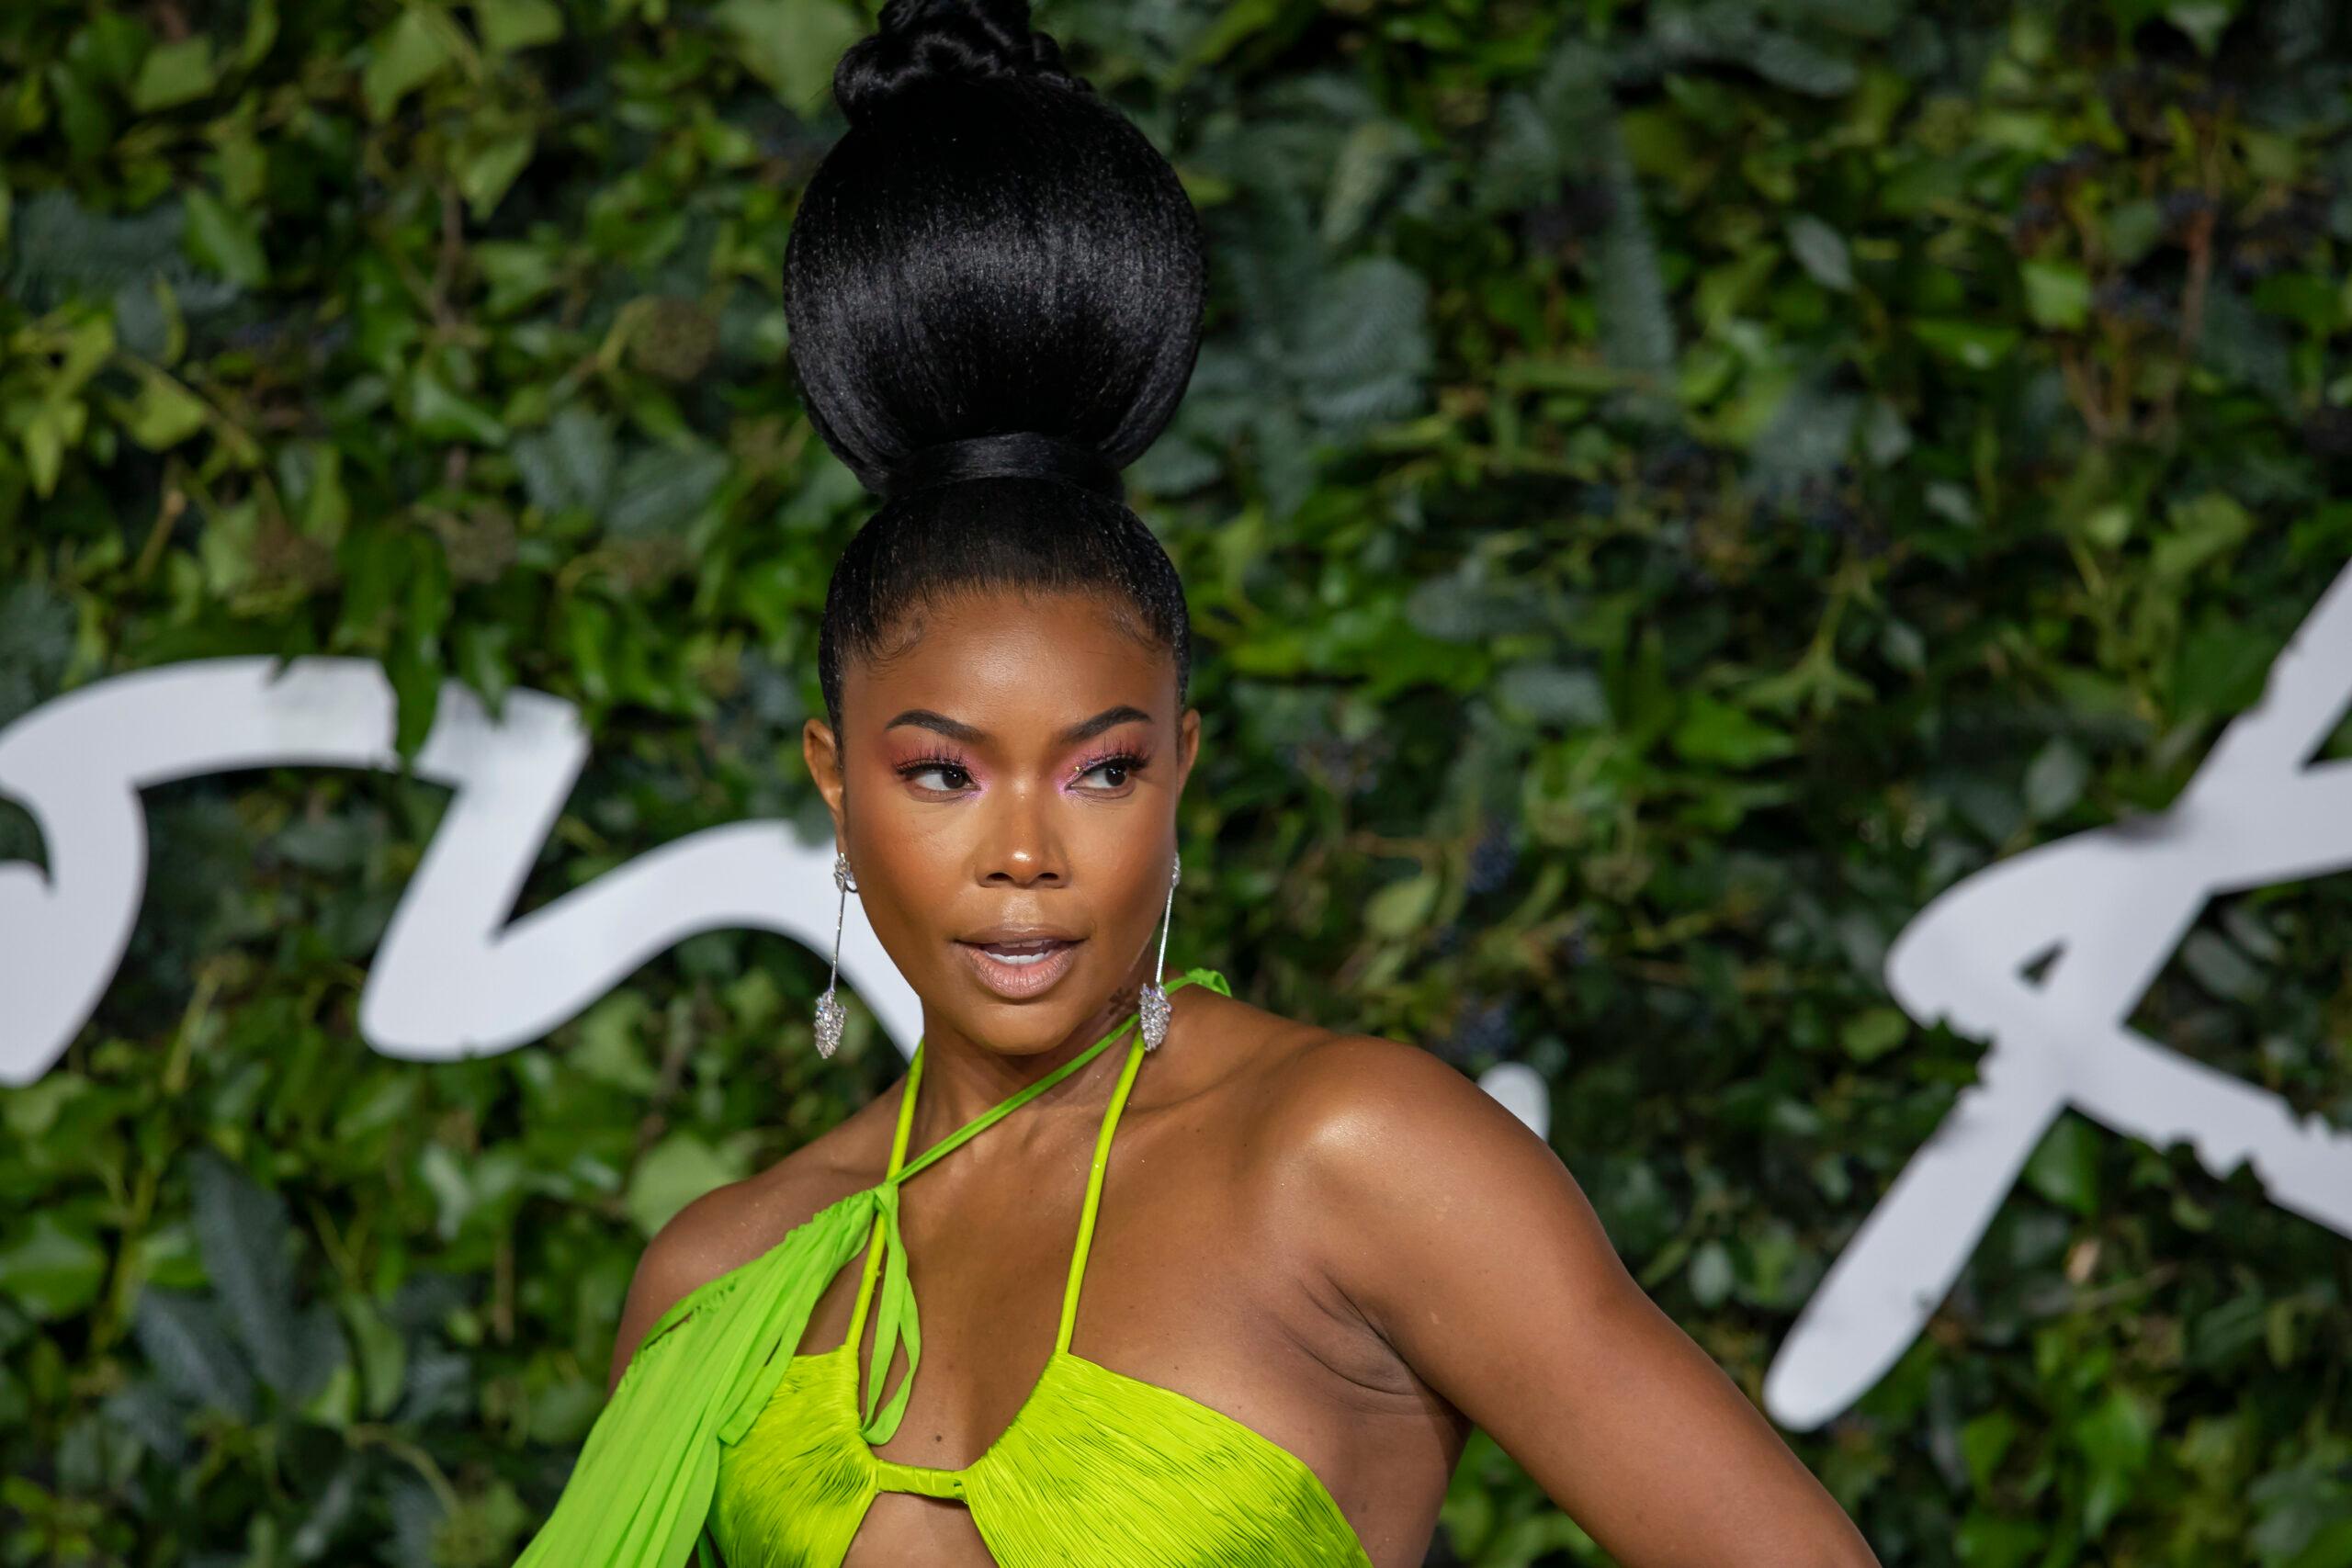 Gabrielle Union at The Fashion Awards 2021 at the Royal Albert Hall in London